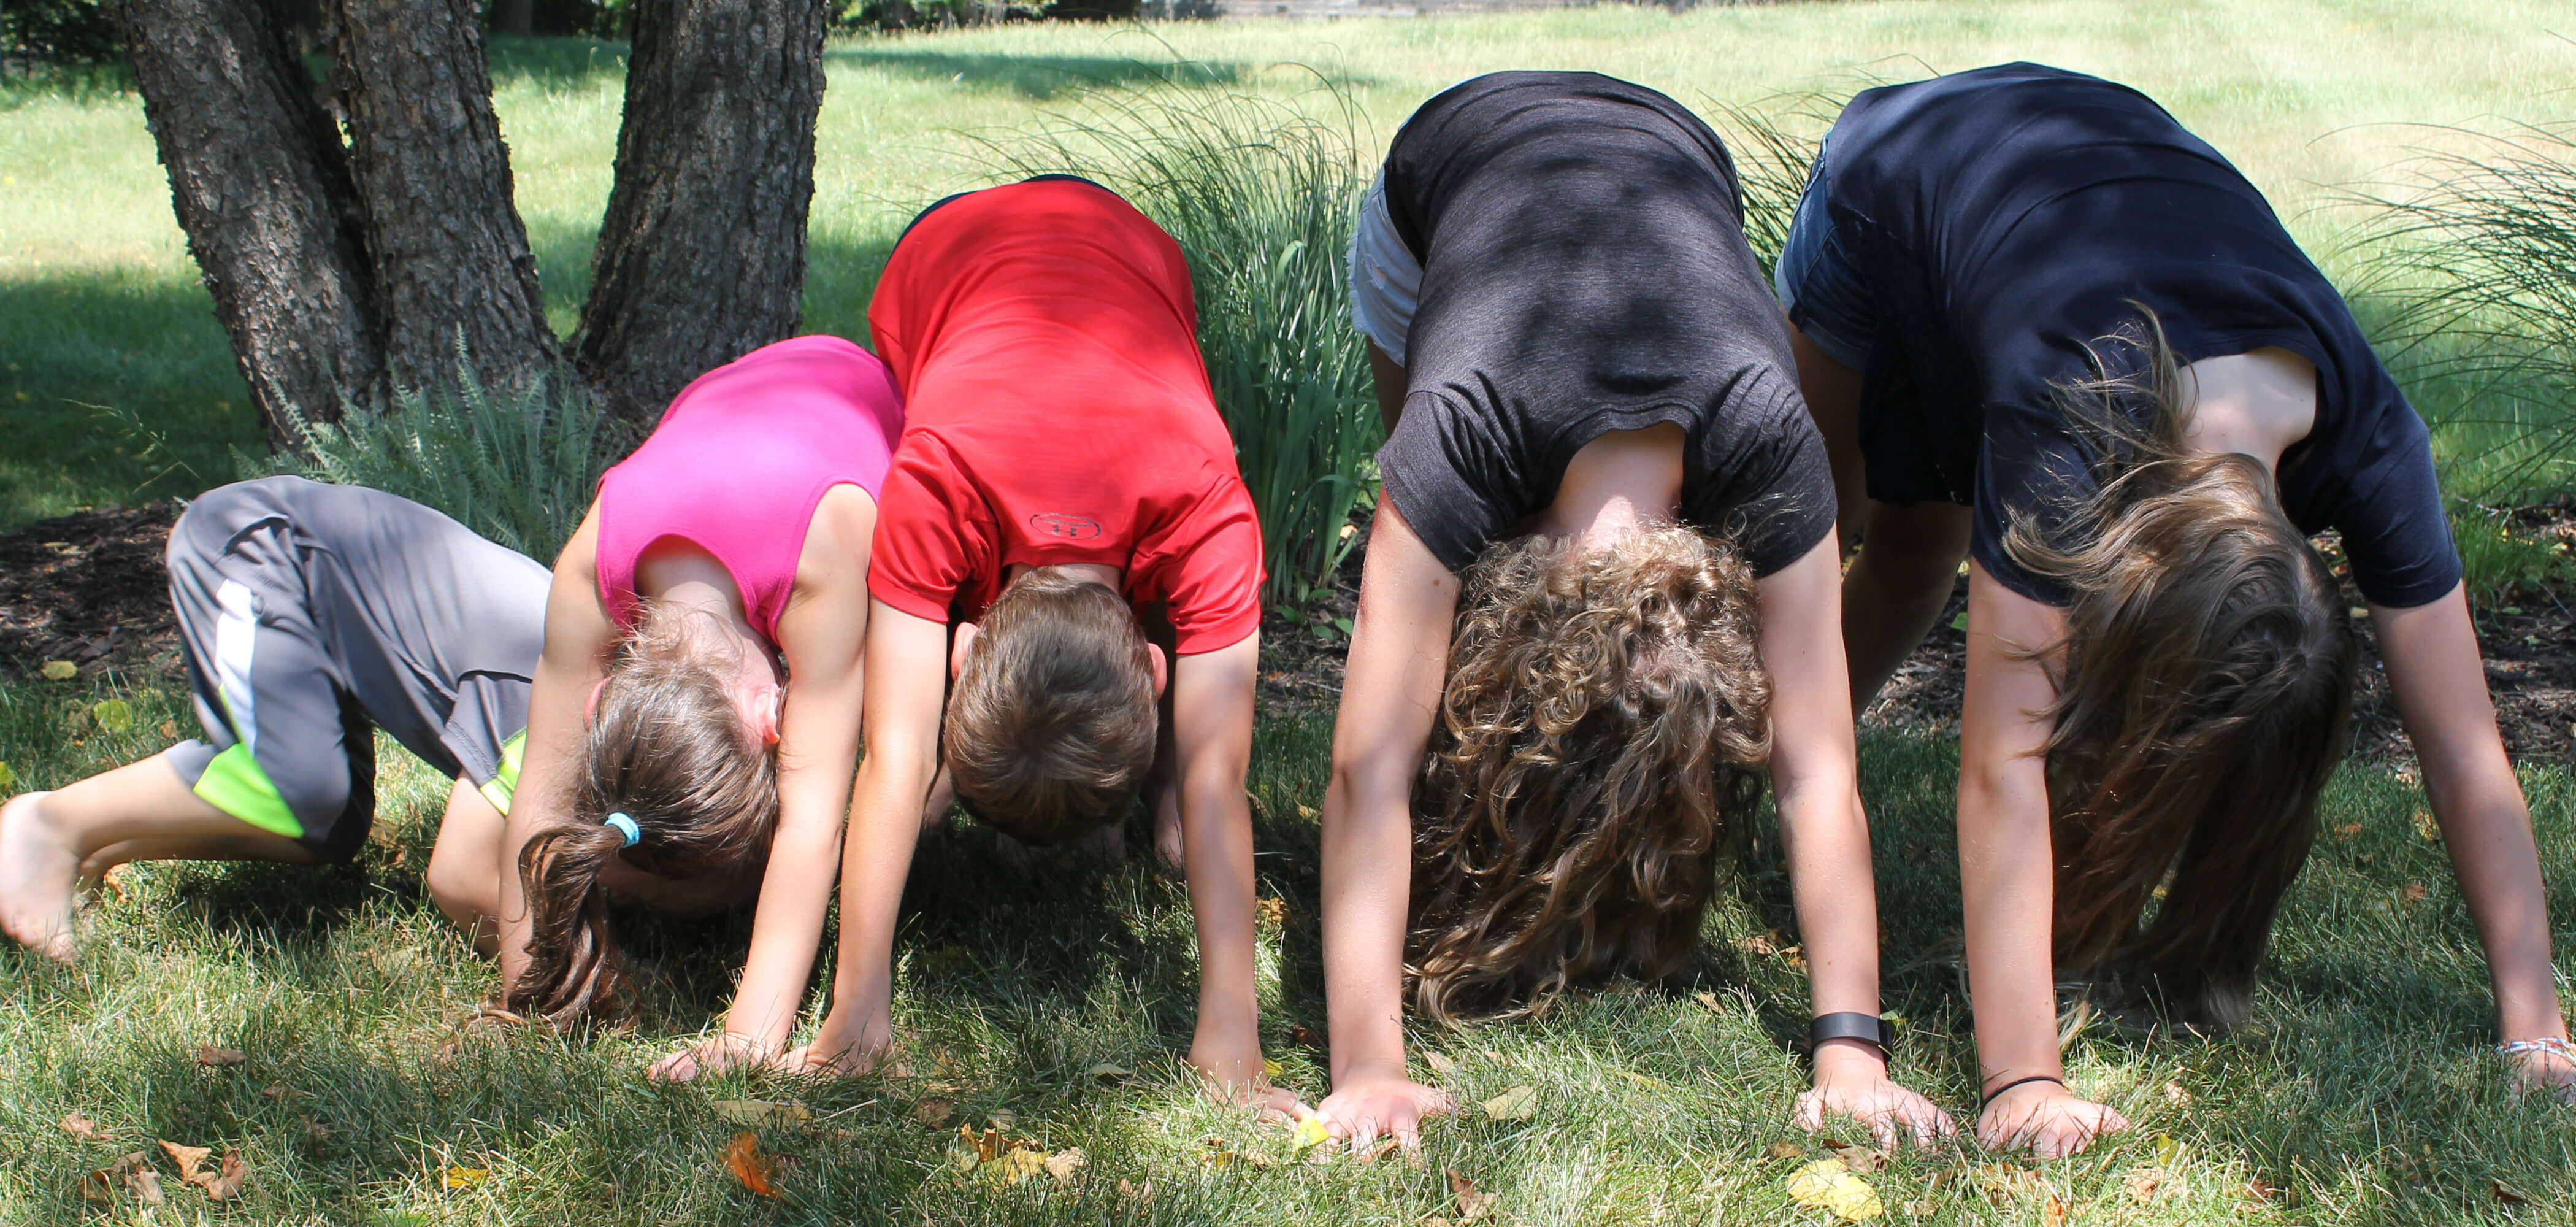 Beginner's Guide to 4-Person Yoga Poses | The Yoga Funk